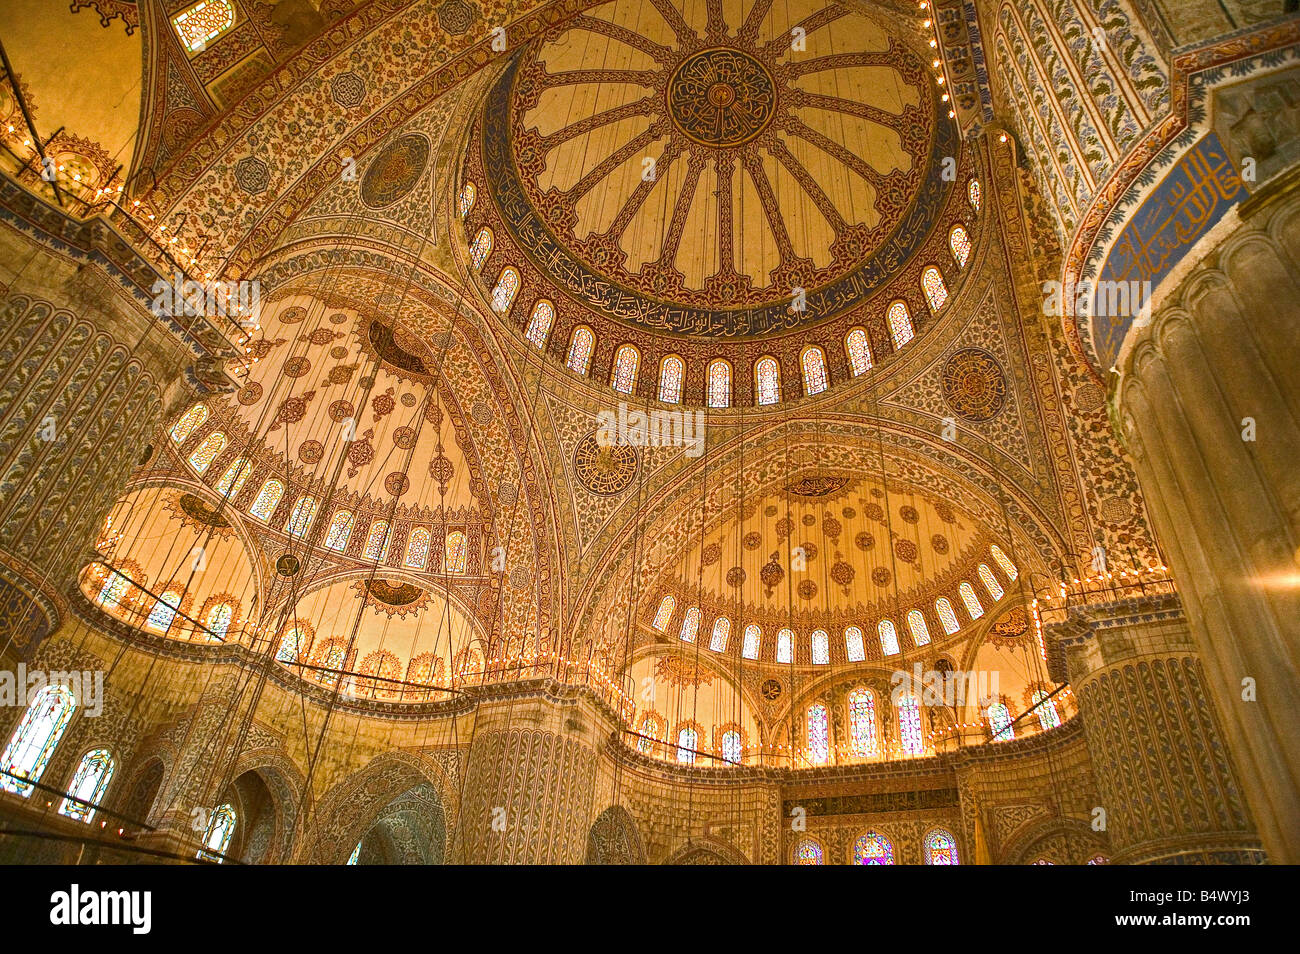 Blaue Moschee in Istanbul Stock Photo